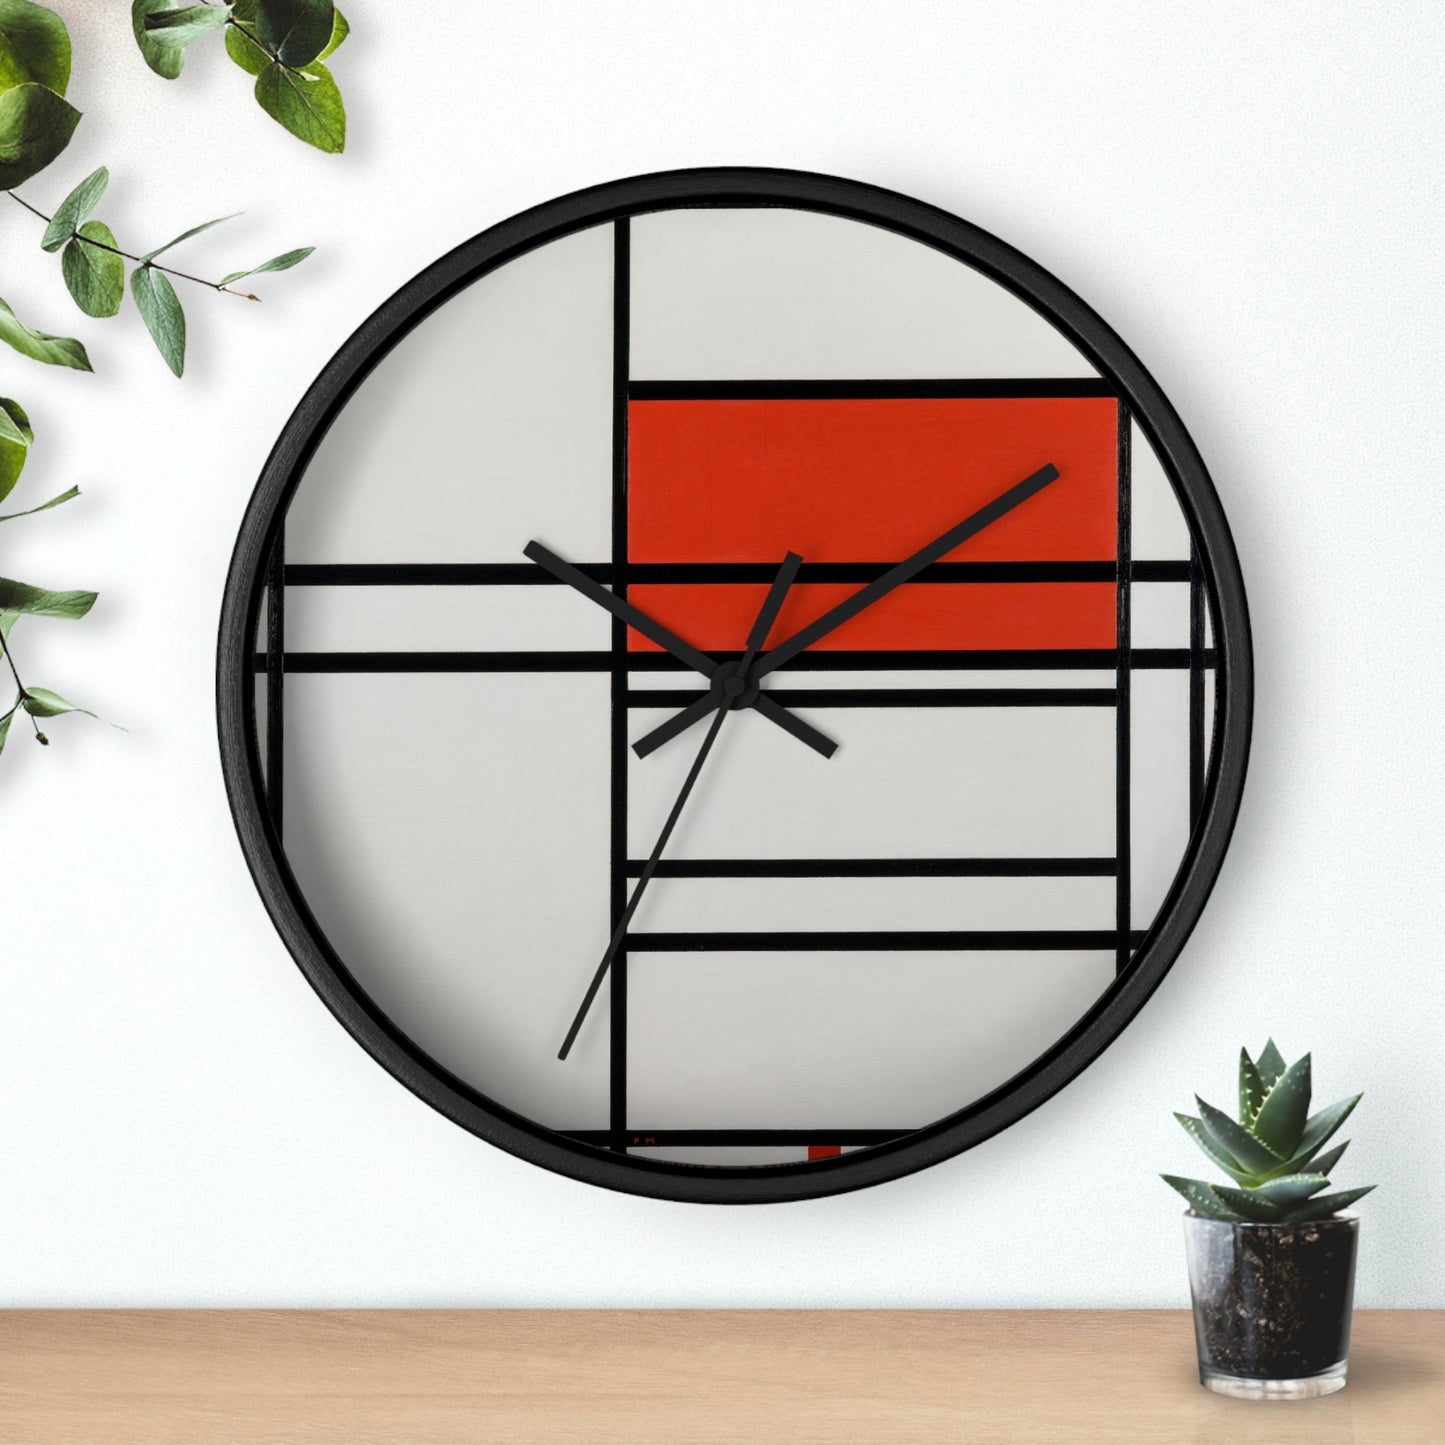 PIET MONDRIAN - COMPOSITION OF RED AND WHITE; Nom 1 - ART CLOCK